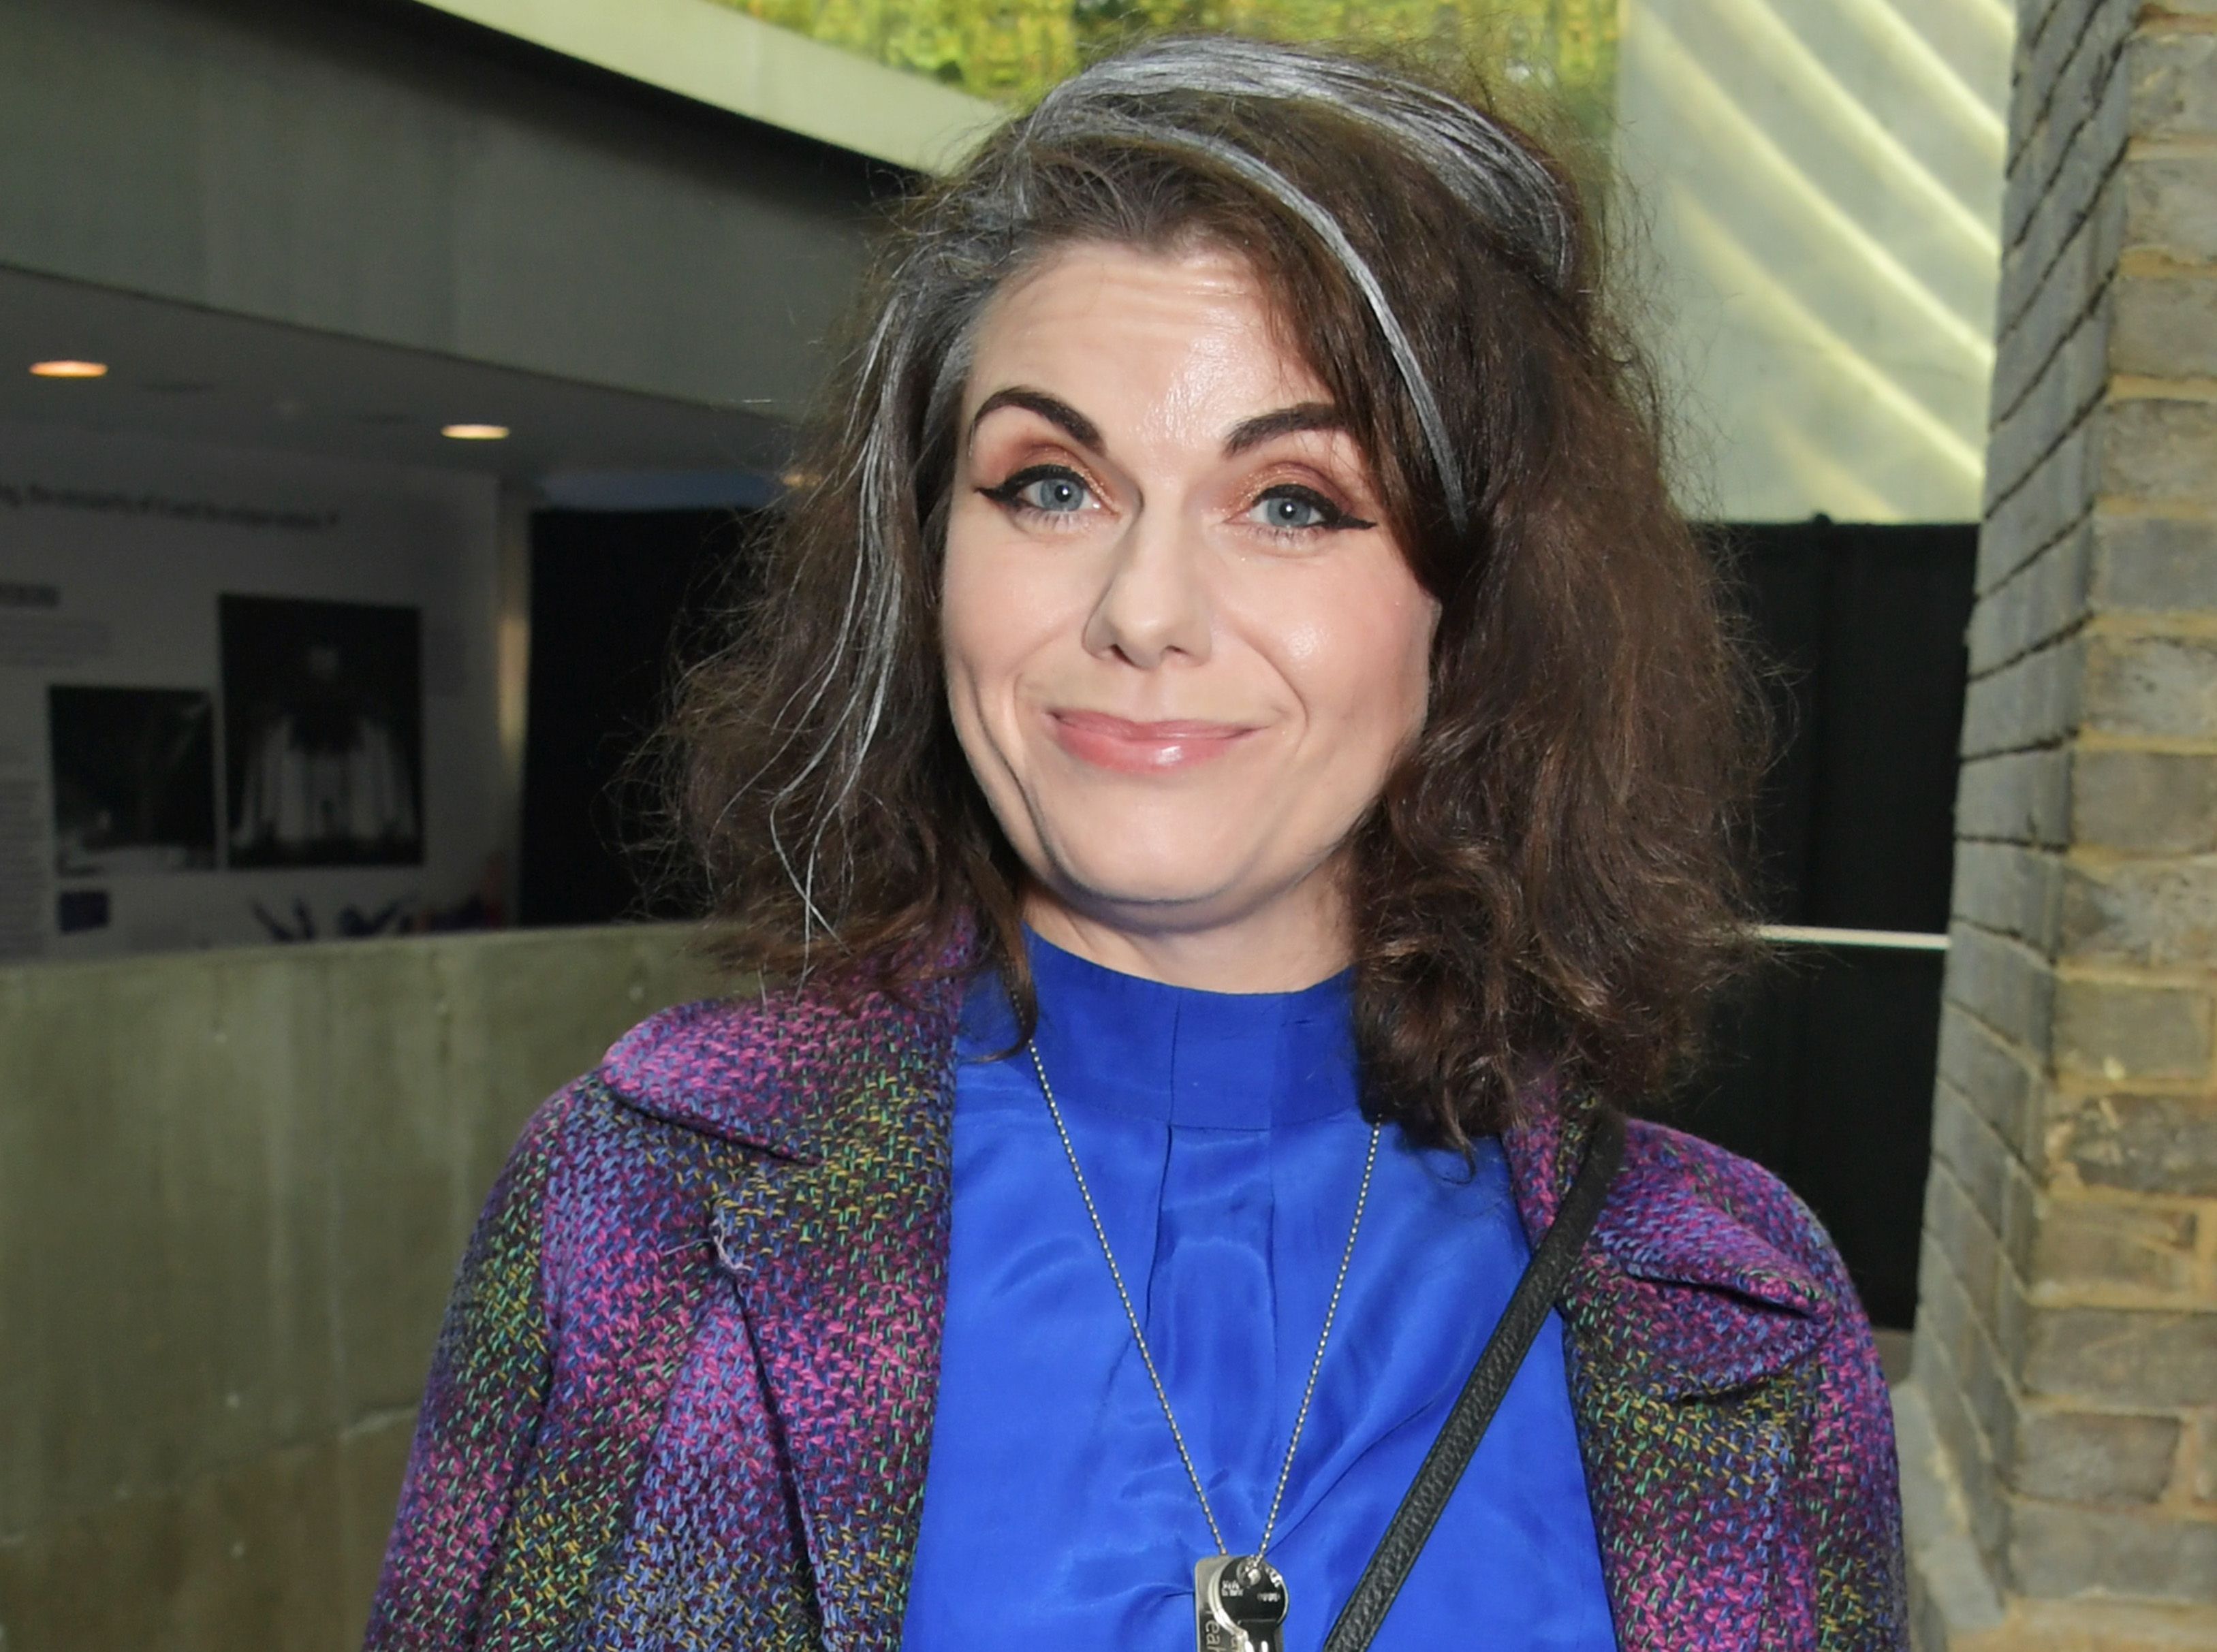 Caitlin Moran on Jordan Peterson: 'I fear for any man in a crisis turning  to him